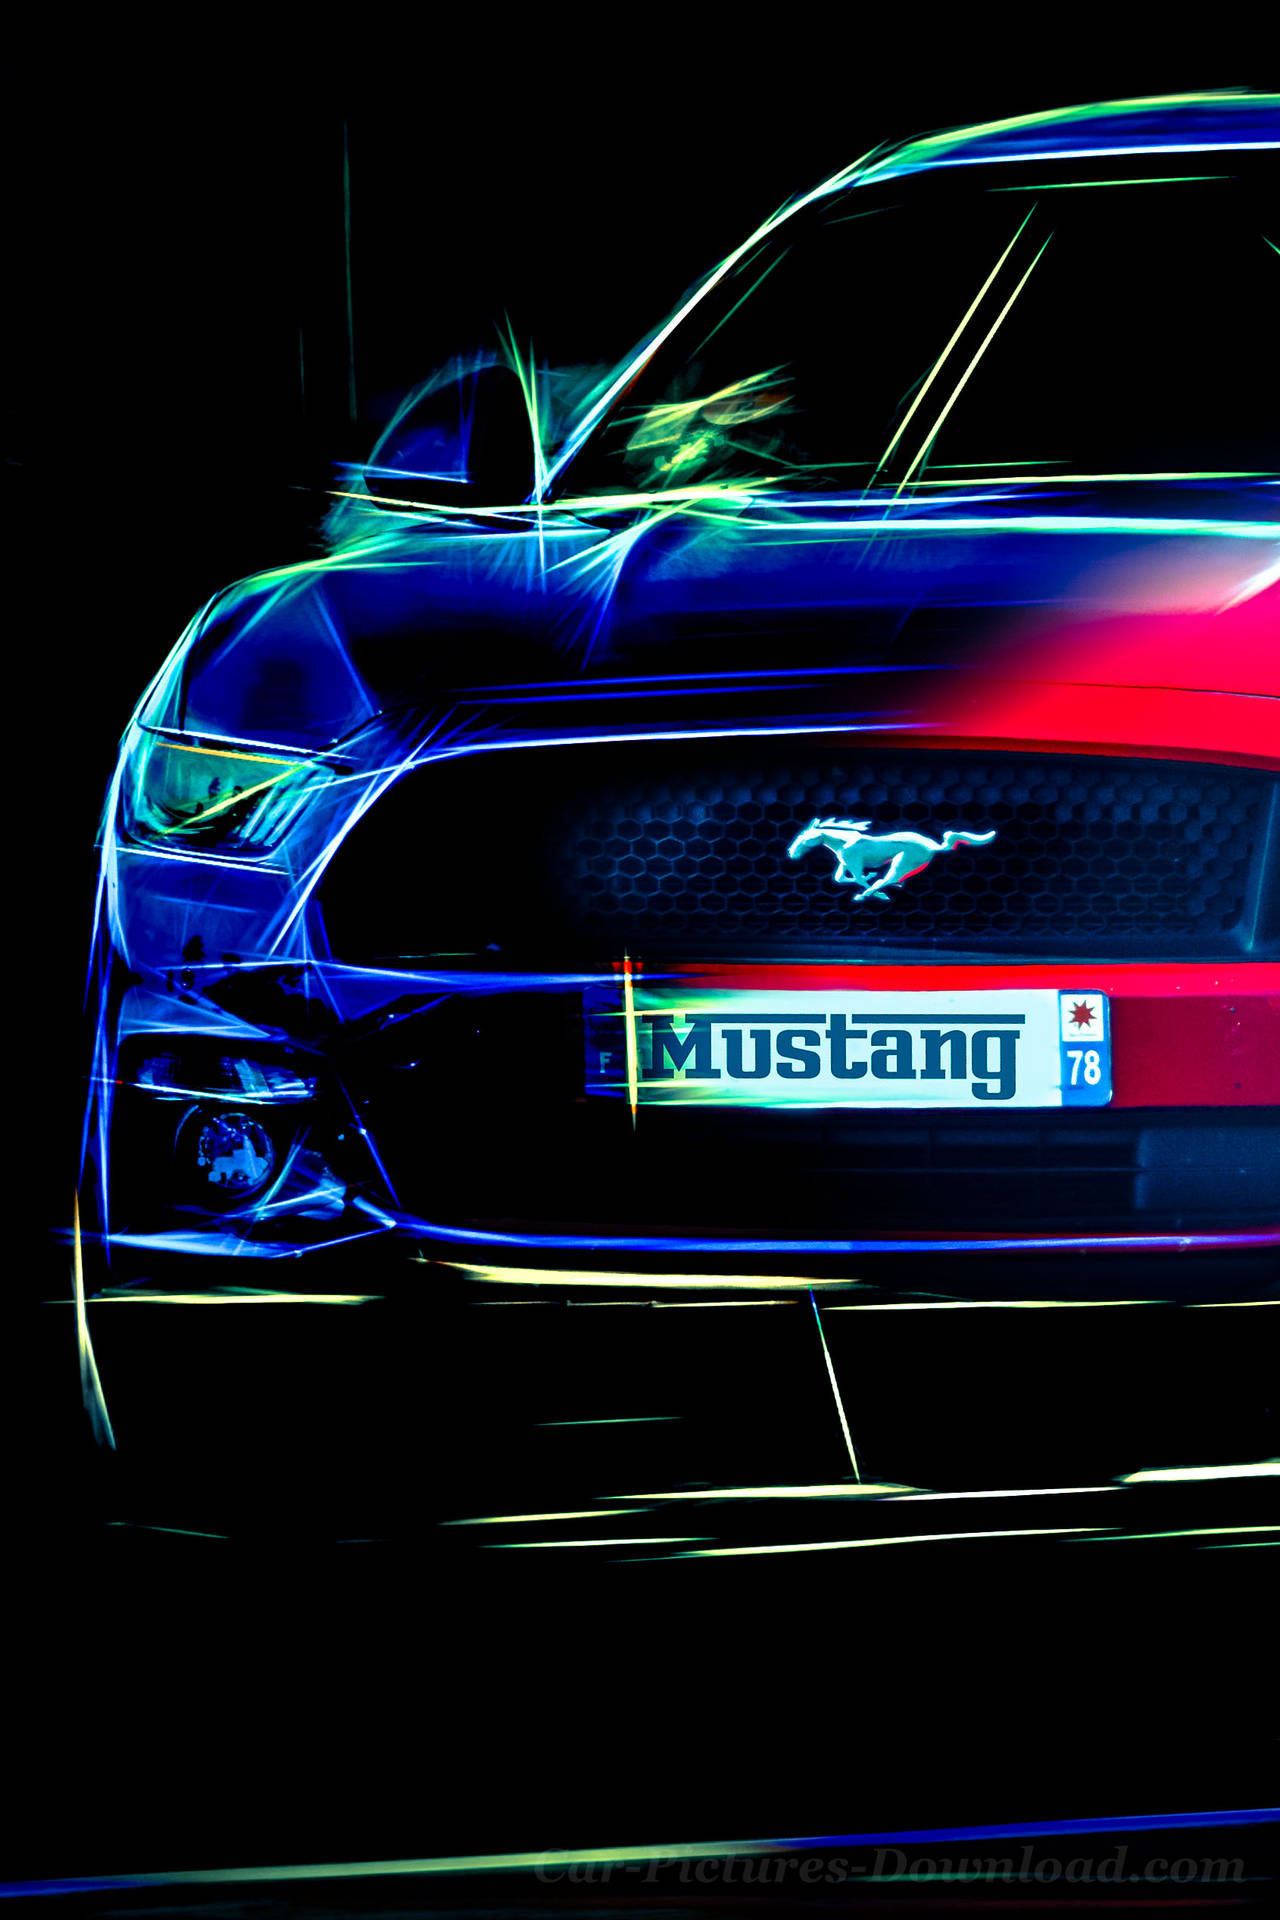 Feel the Power of a Cool Mustang Wallpaper